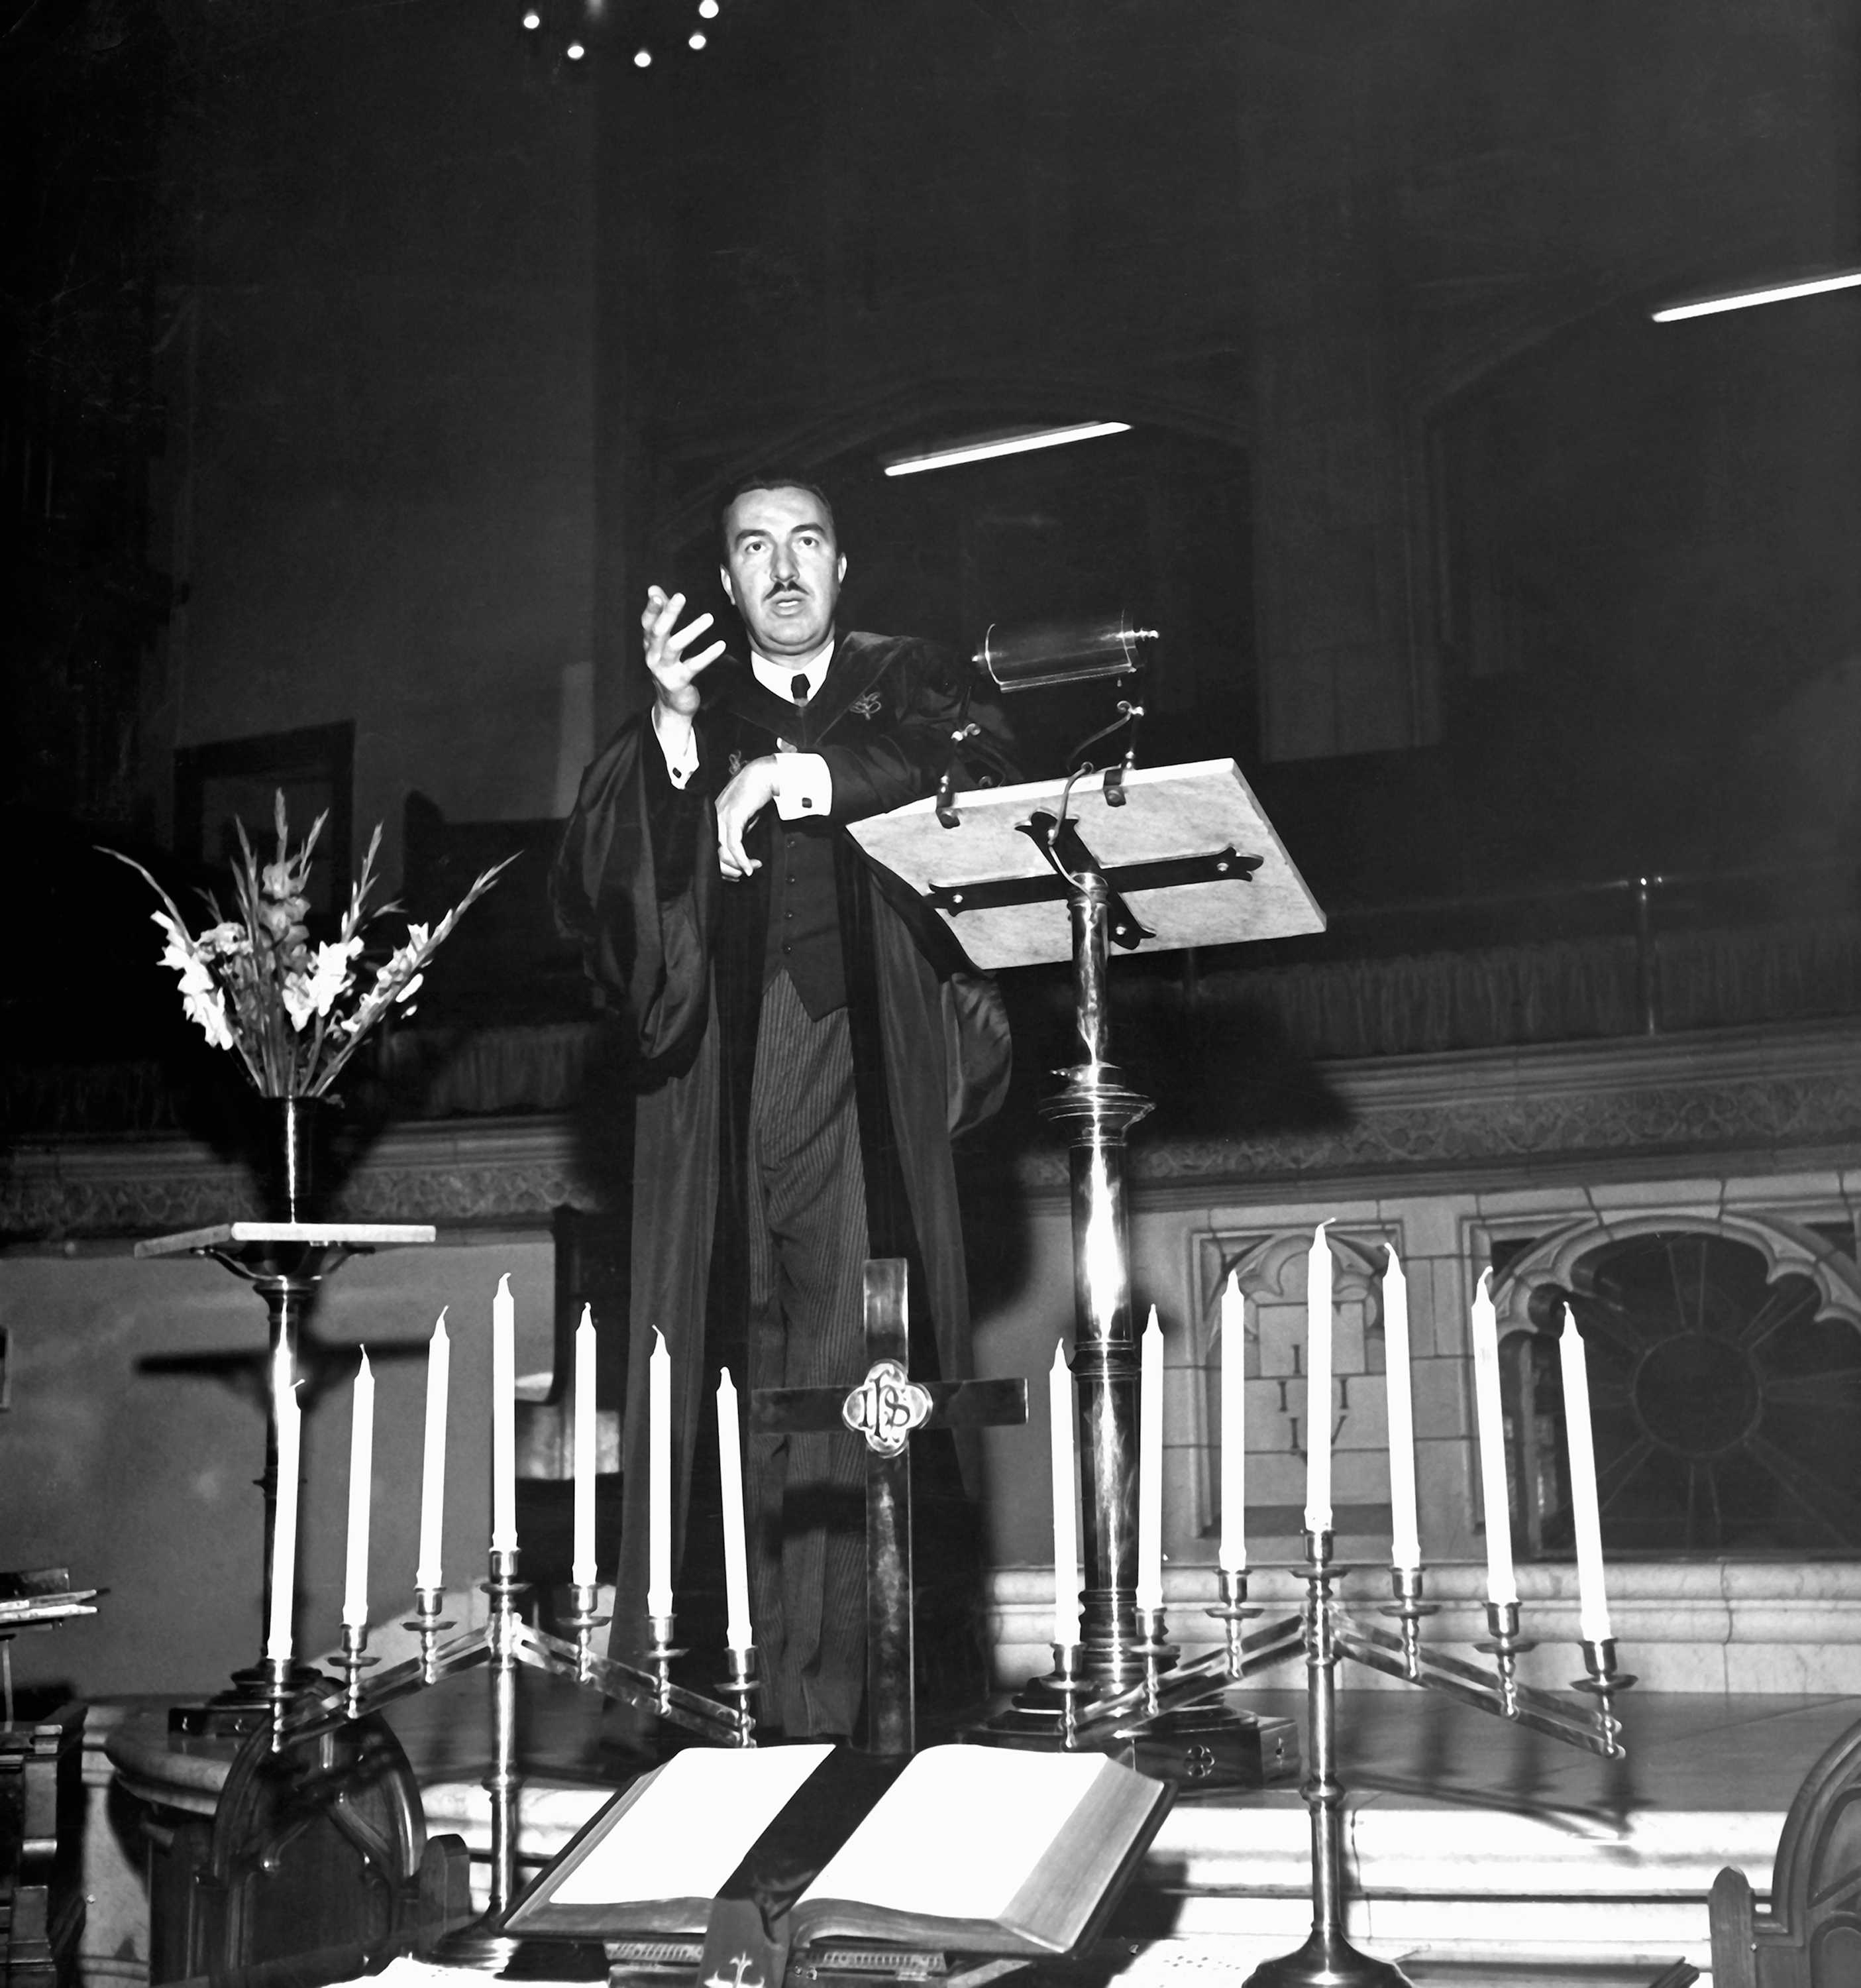 Black and white photograph of Rev. Adam Clayton Powell Jr. addressing his congregation